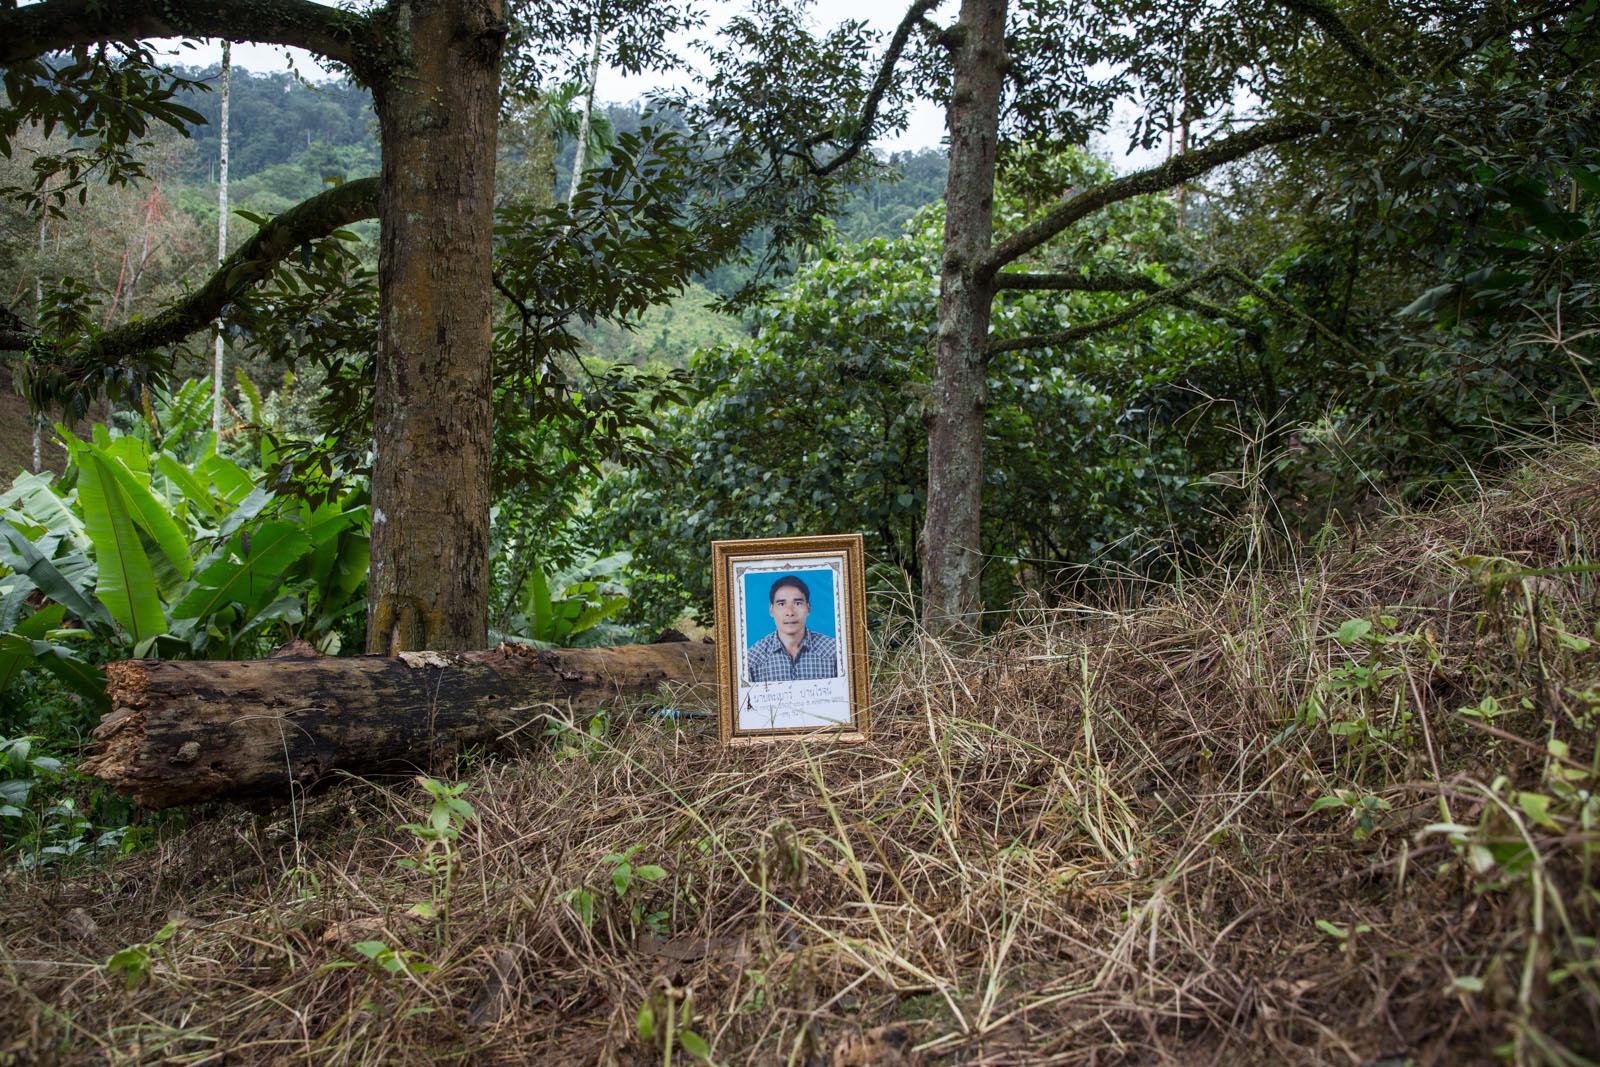 FOR THOSE WHO DIED TRYING - Phayao Panroj, a durian farmer and conservationist from...